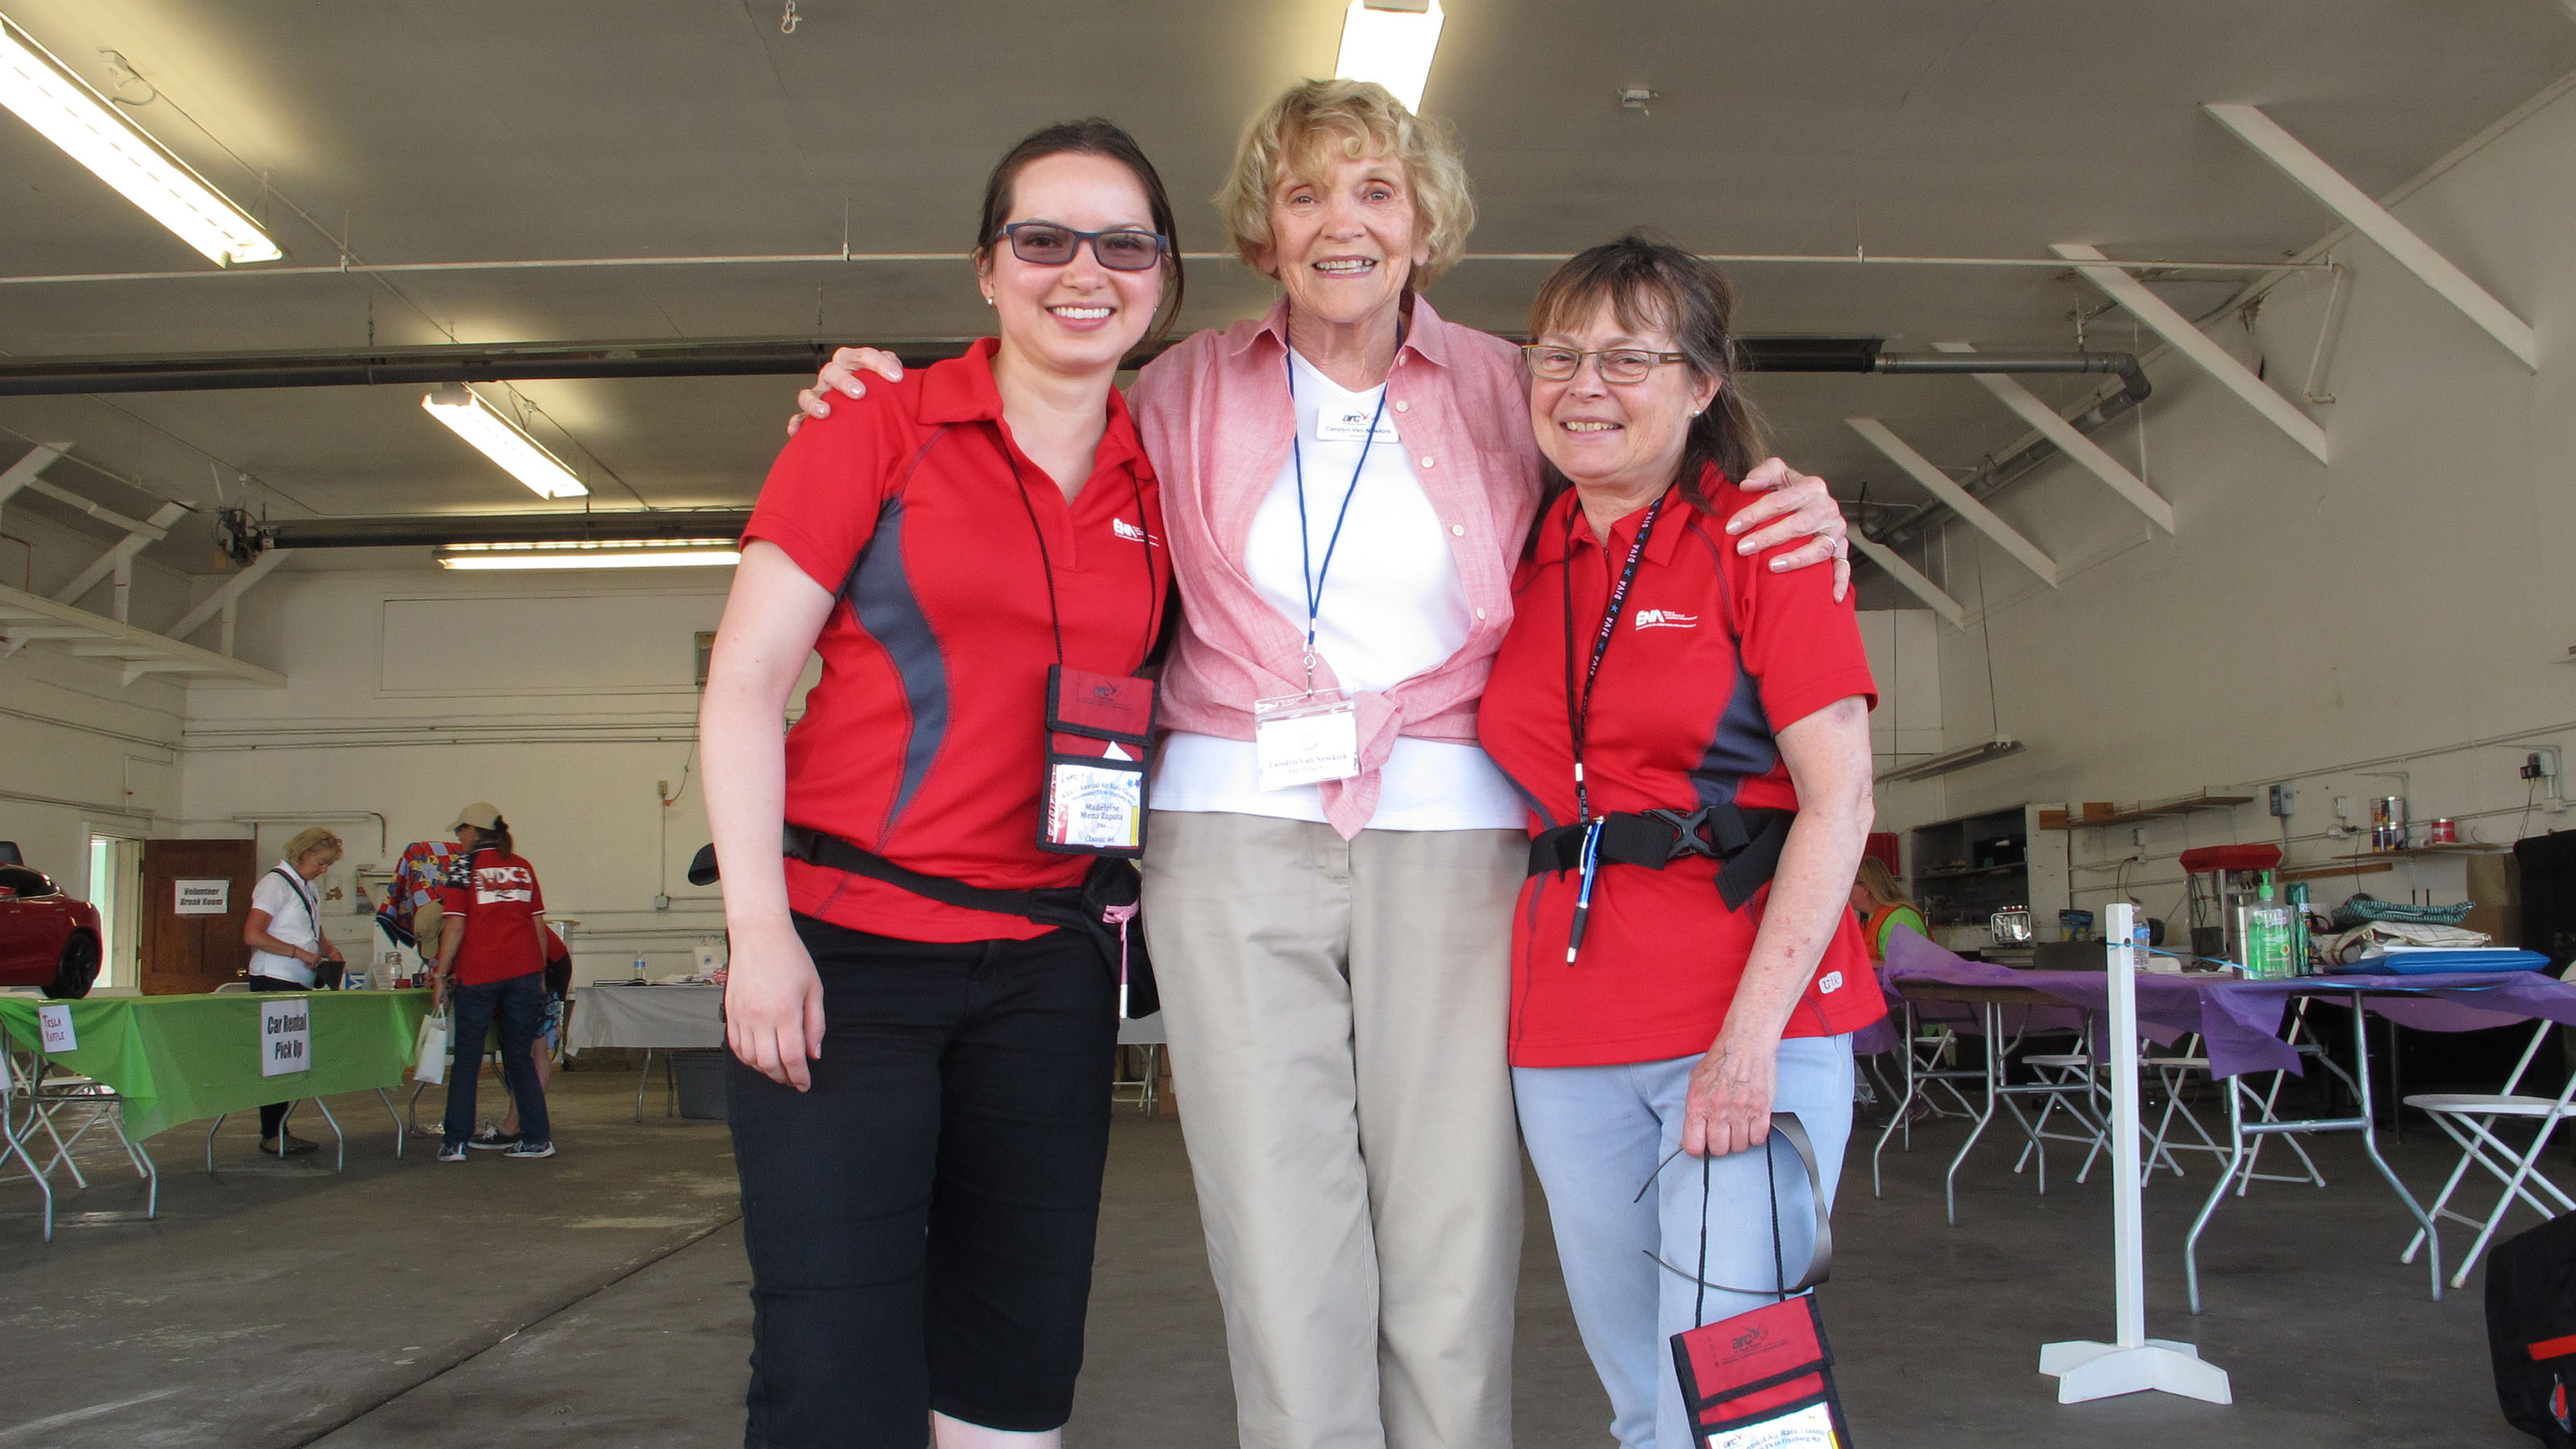 Madeleine Mena Zapata (left) and Michèle Rivest (right) of École Nationale d'Aérotechnique are welcomed to Fryeburg, Maine, by Air Race Classic Race Director Carolyn Van Newkirk. The Canadian team flew to a twelfth-place finish. Photo by Dan Namowitz.